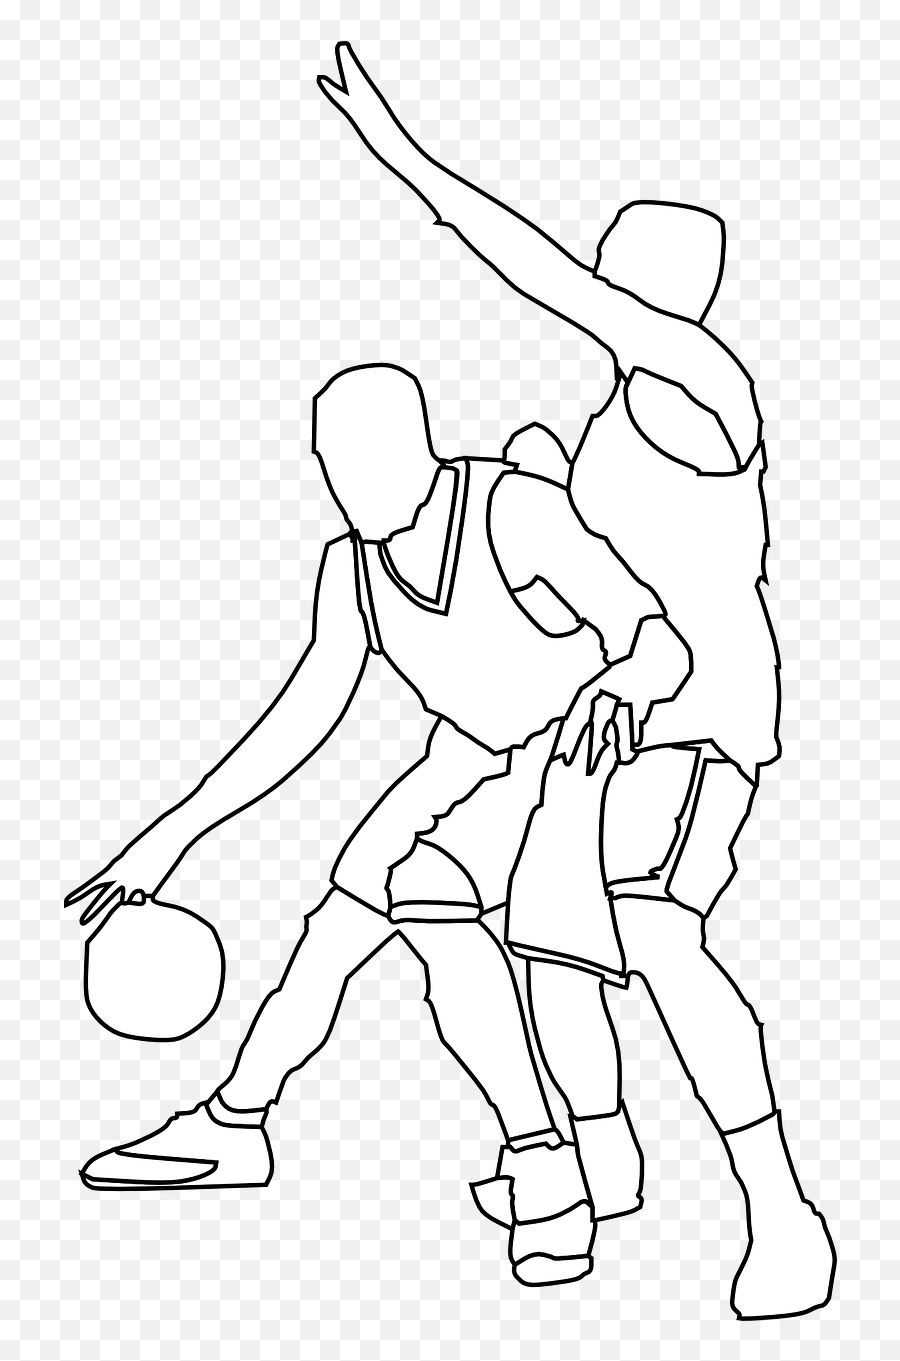 Basketball Players Defence - Free Vector Graphic On Pixabay Basketball Game Drawing Player Png,Basketball Player Silhouette Png